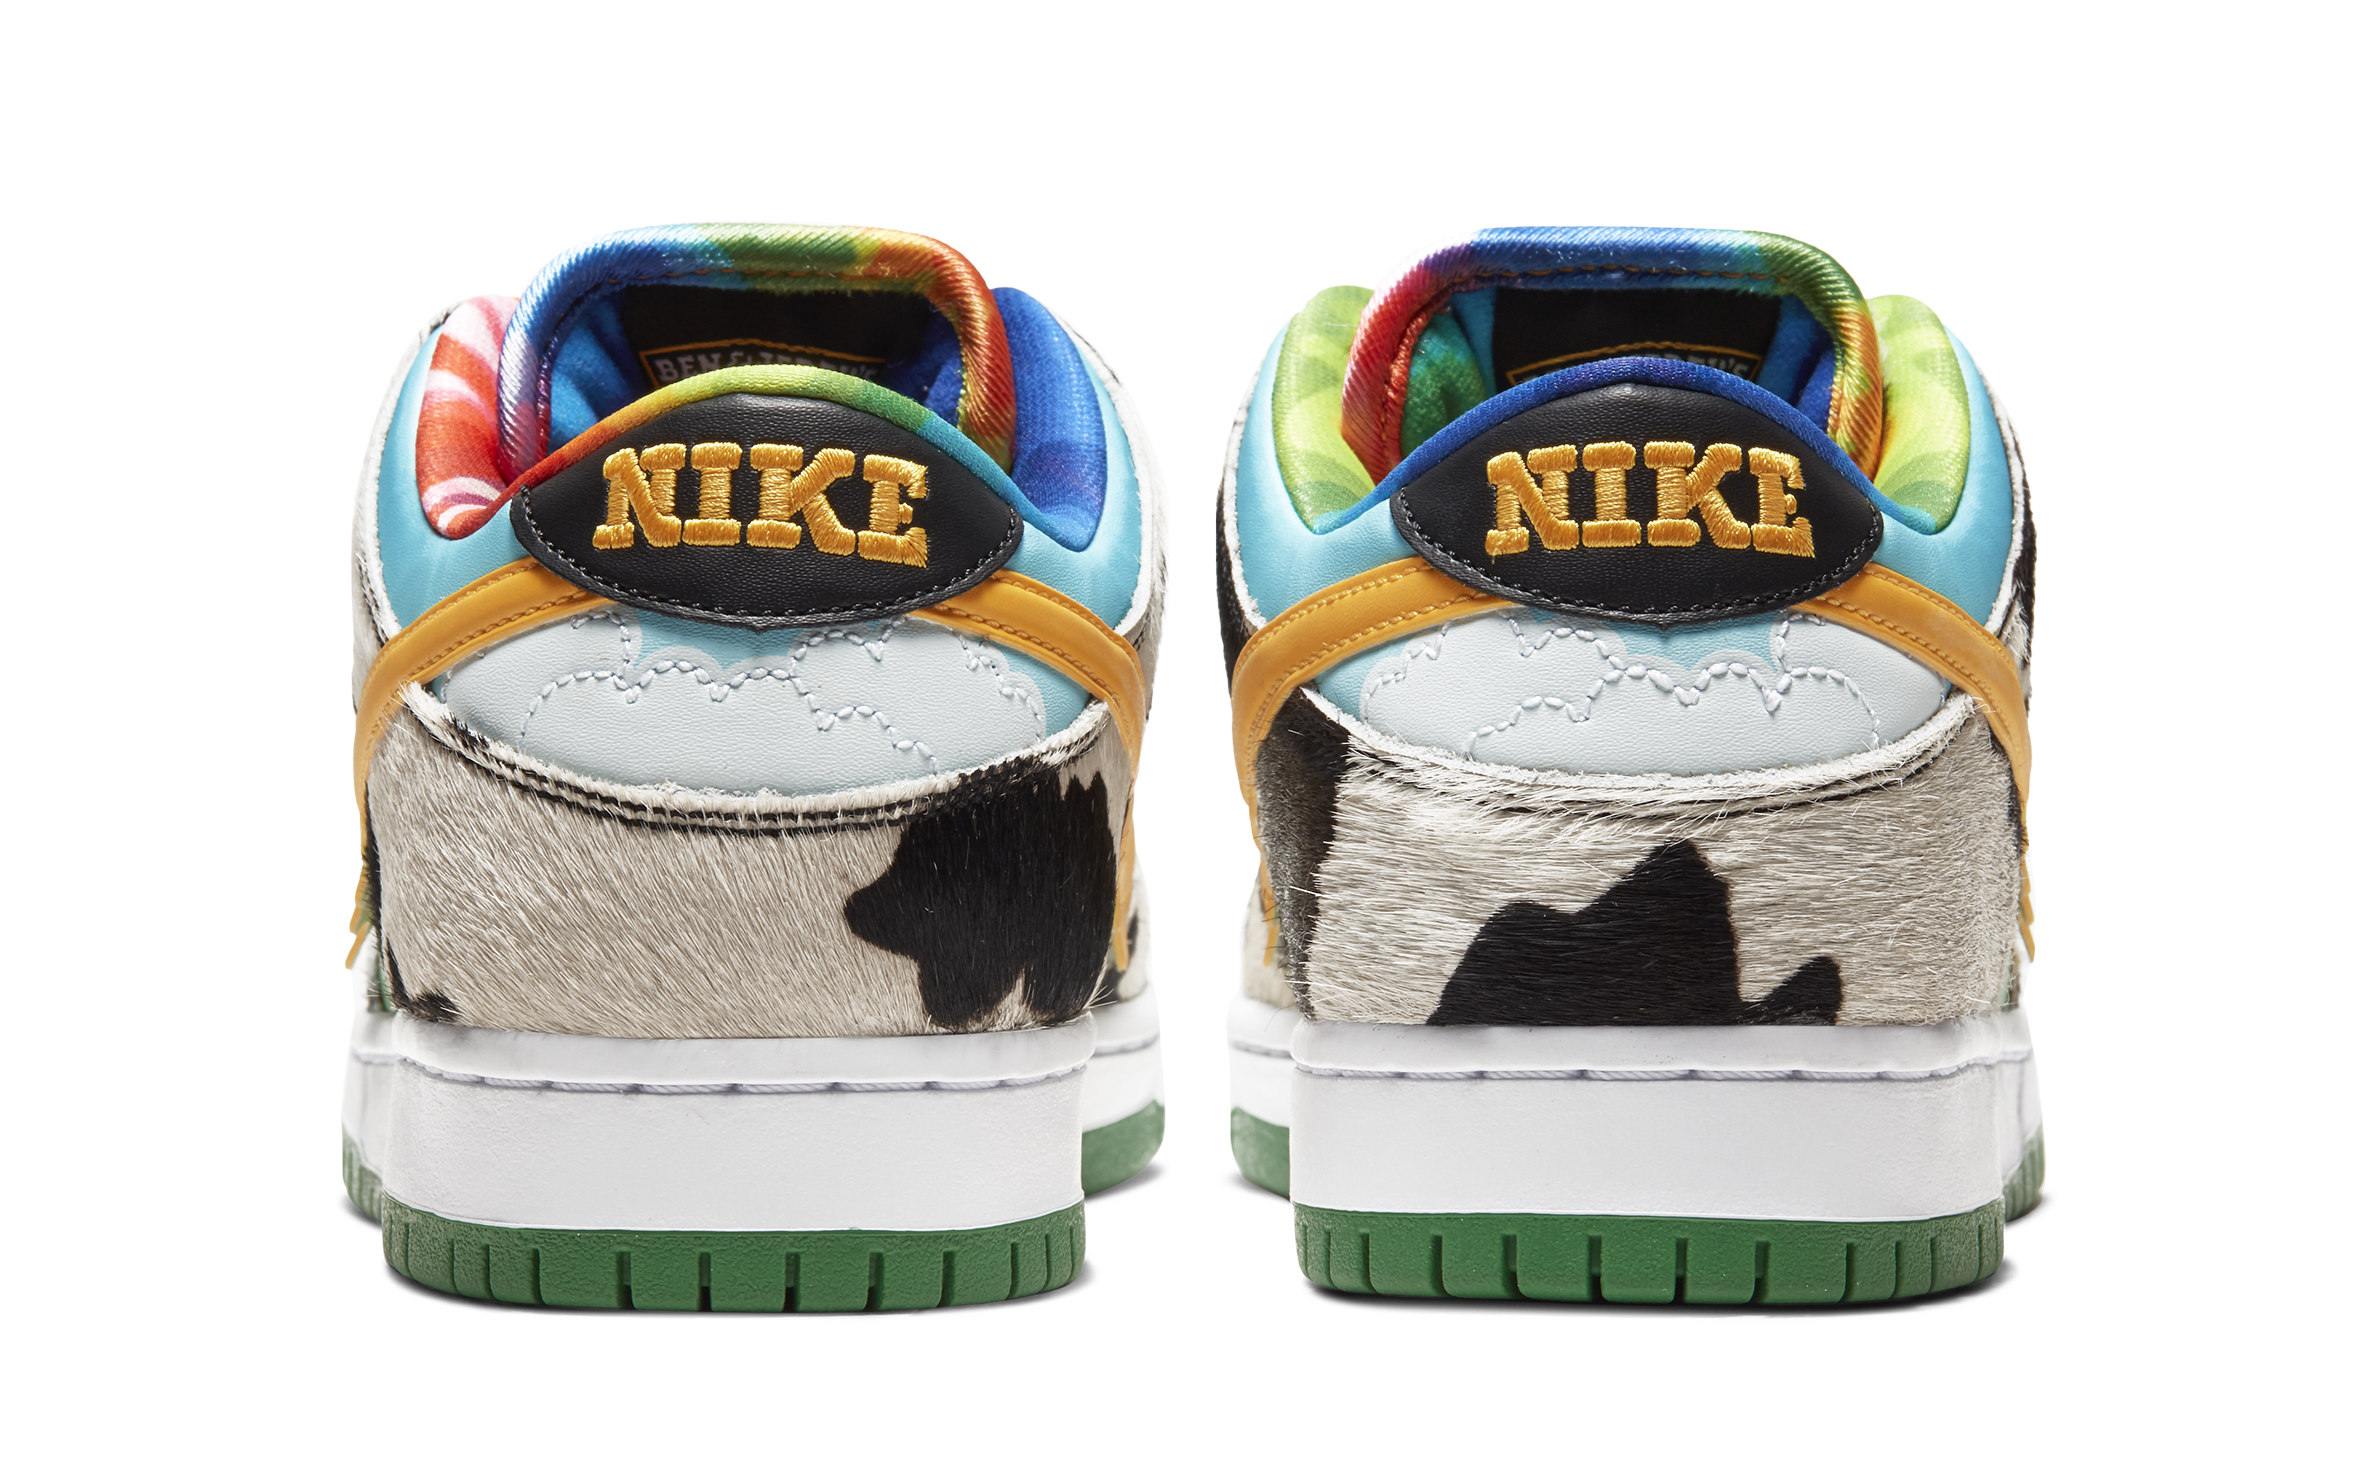 Cop or drop? Nike SB Dunk Low Ben & Jerry's Chunky Dunky #sneaker, ben  and jerry dunks